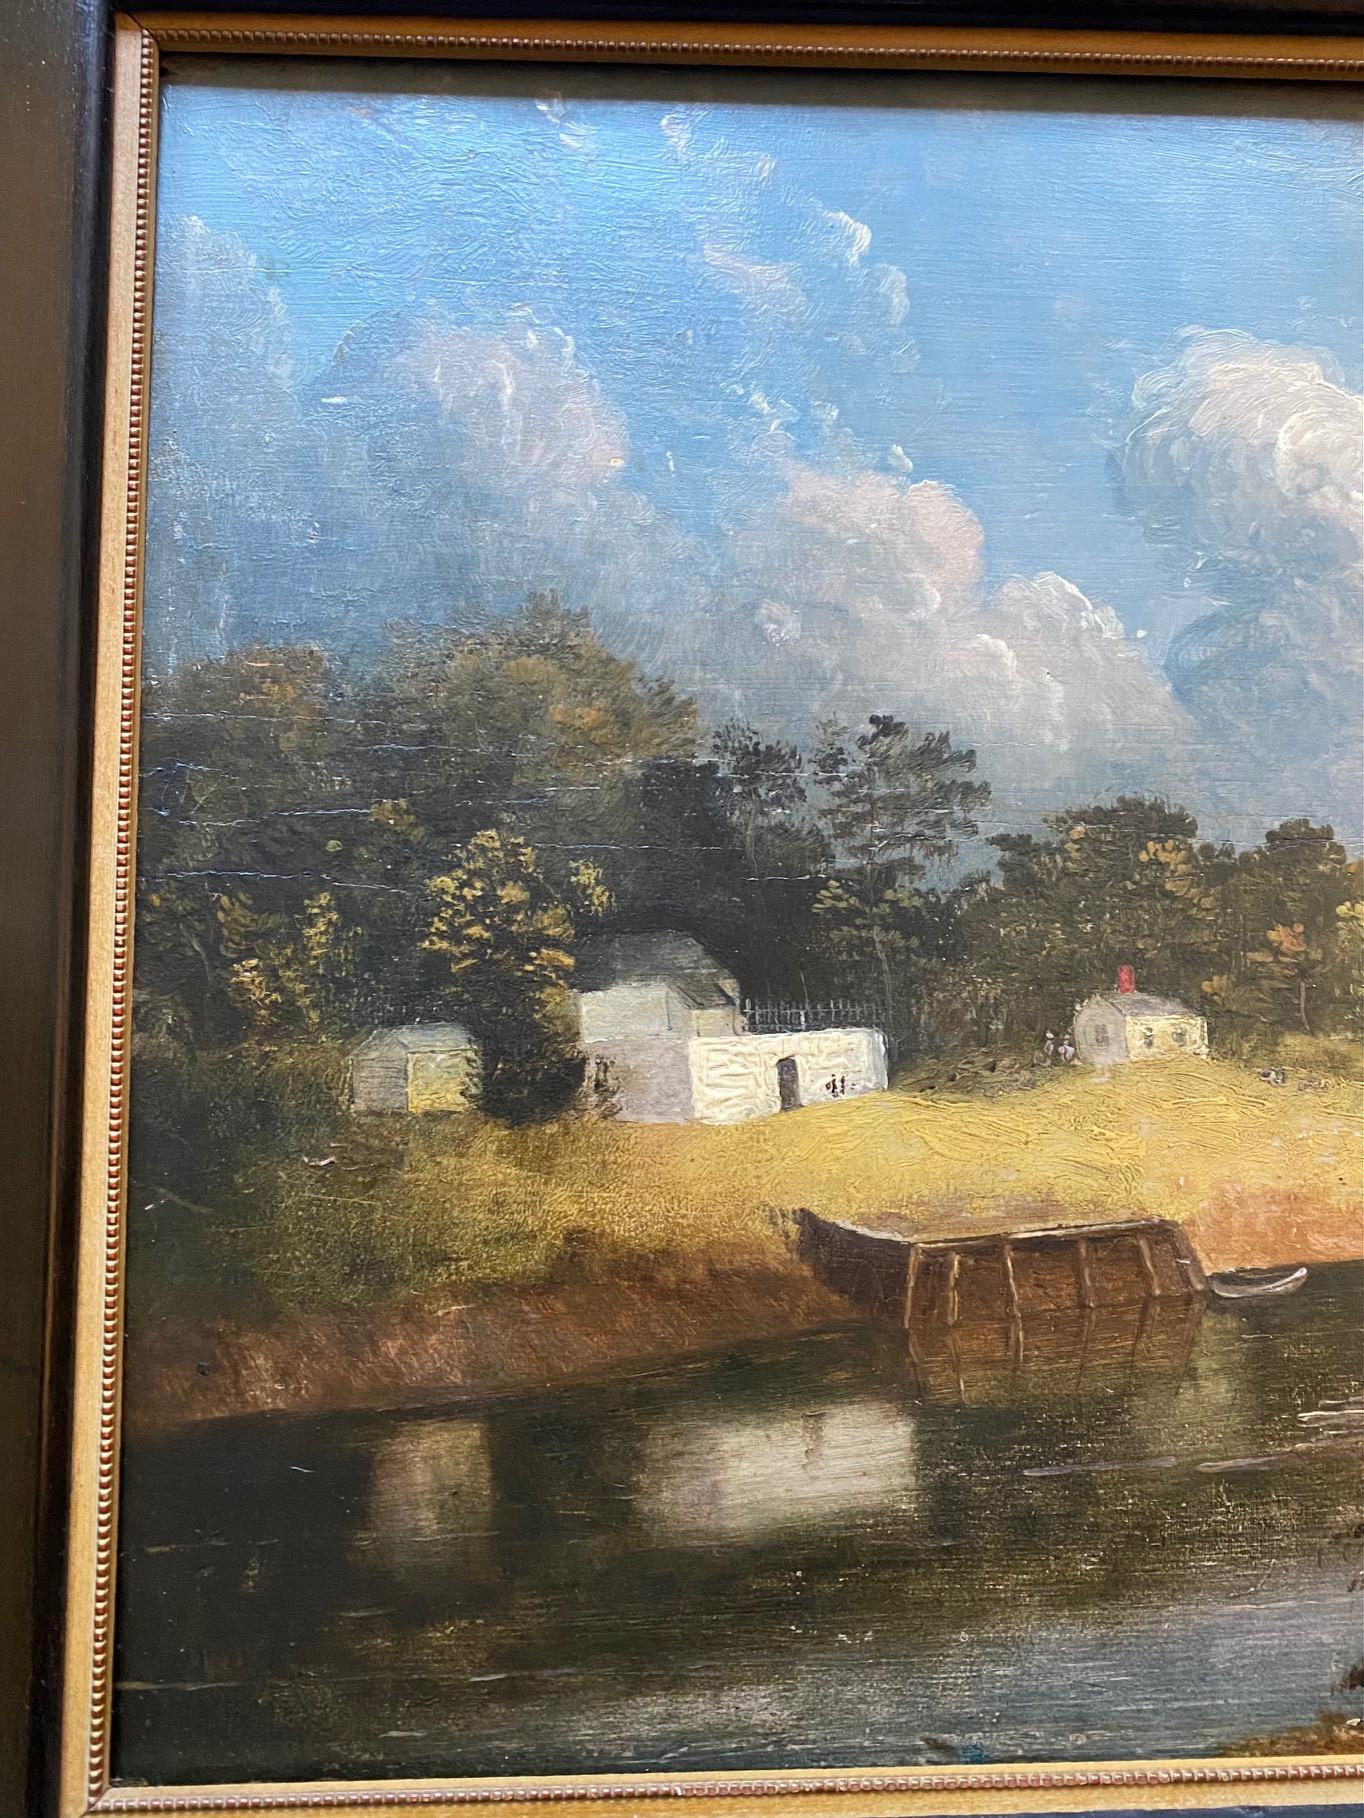 Early 19th Century Boston Landscape Painting, signed and dated by Boston artist J. Wolcott, 18_9, an oil on panel landscape painting of river winding through rural countryside, with period inscription on the reverse identifying the scene as along